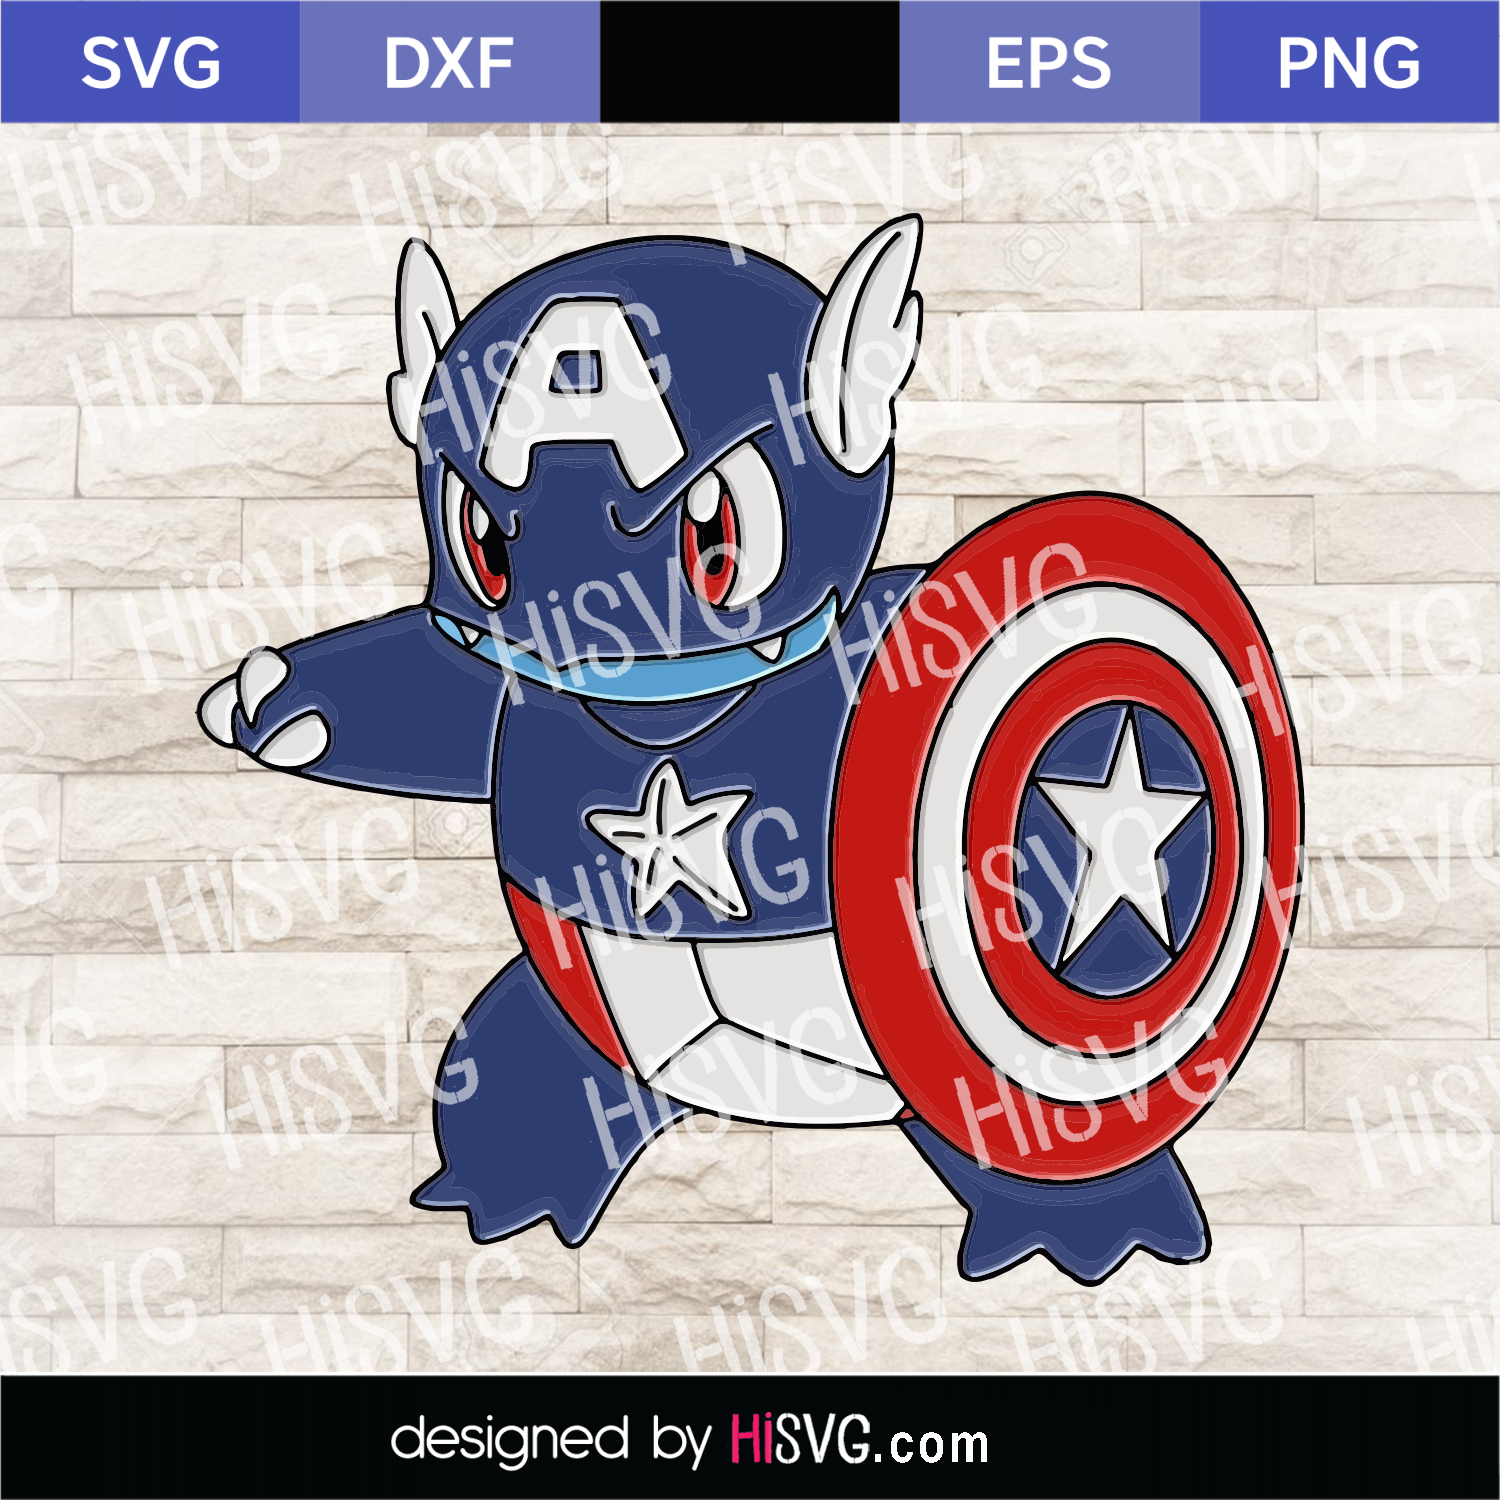 Download Captain America Squirtle Svg Psd Ai Png Eps Sxf Pokemon Go Characters Animes Instant Download Hisvg Com Free Svg Cut Files Hisvg Com Free Cricut And Silhouette Cut Files